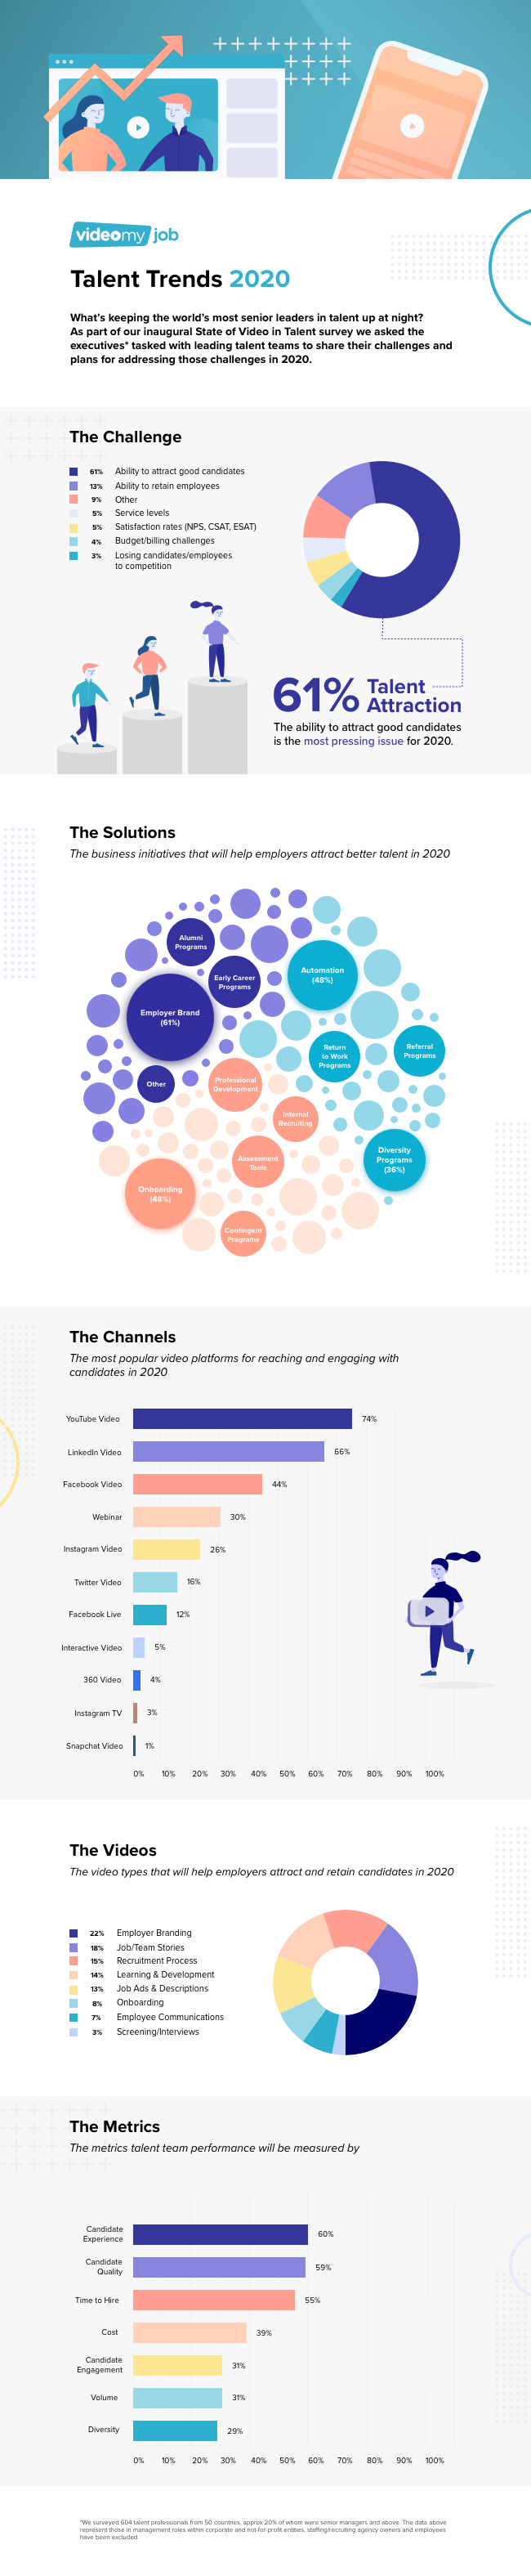 VideoMyJob Talent Trends [Infographic]